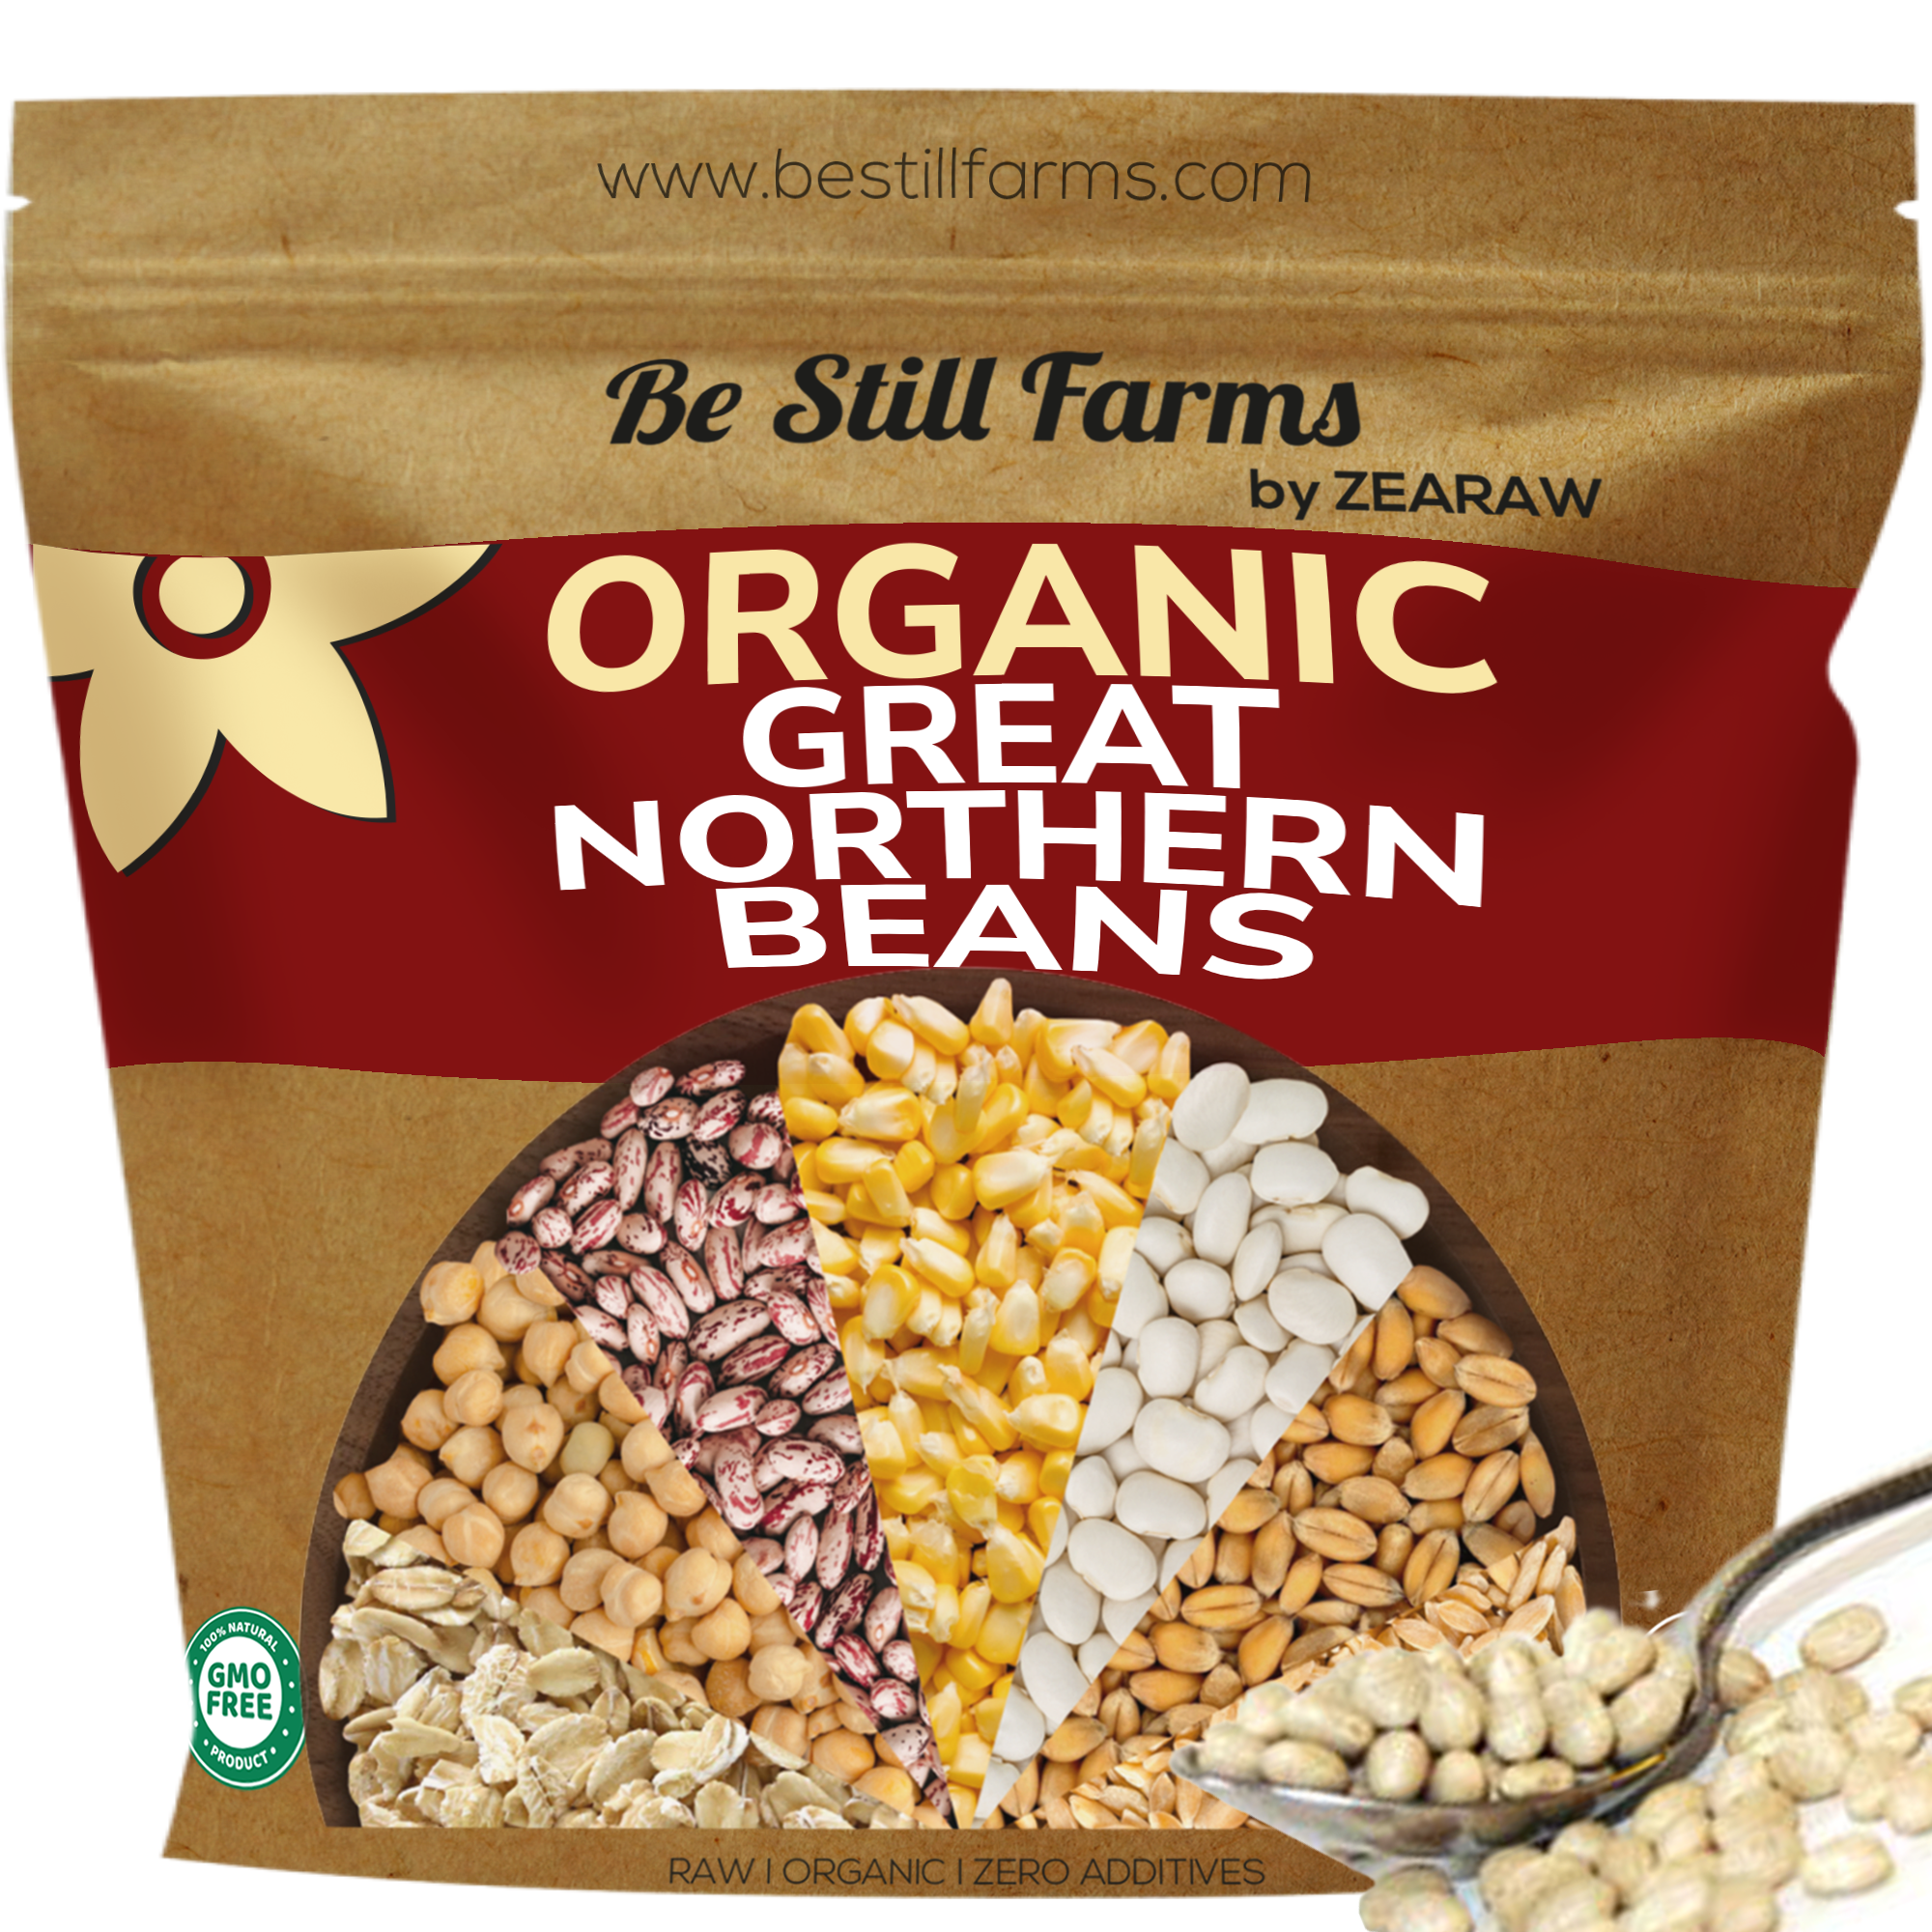 Great Northern Beans - Be Still Farms